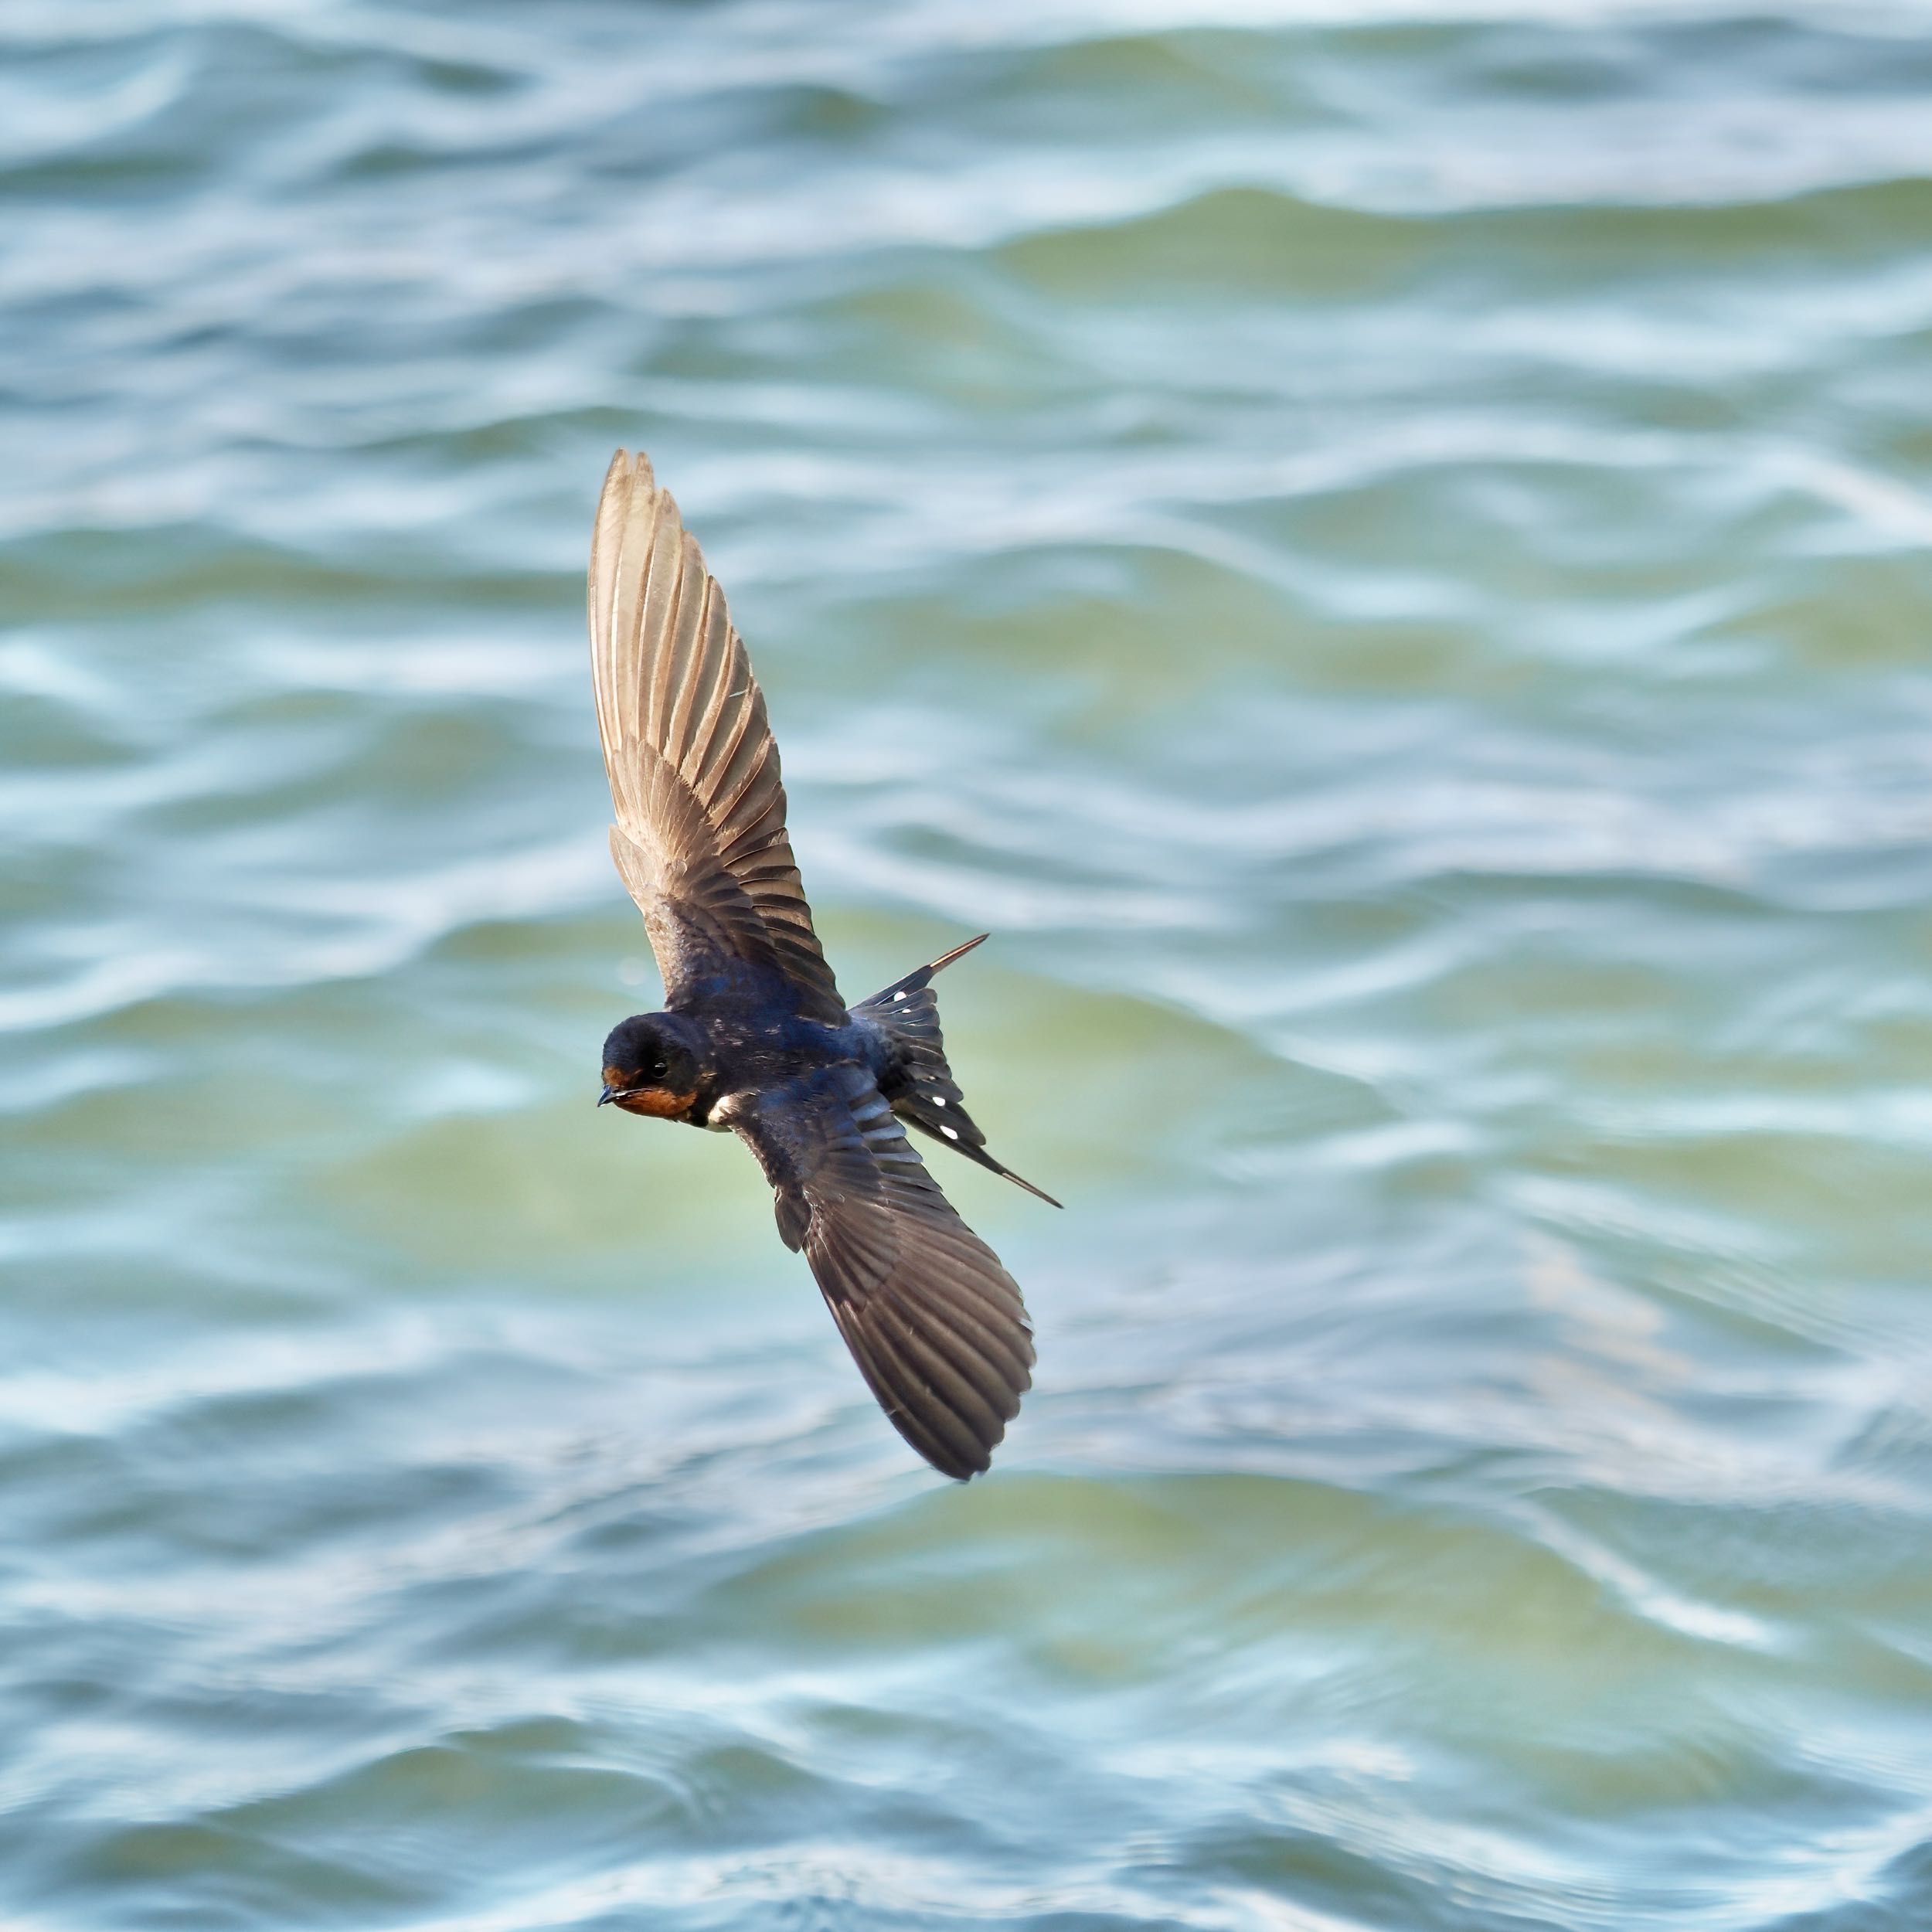 Barn swallow, wings spread in a left turn over water.